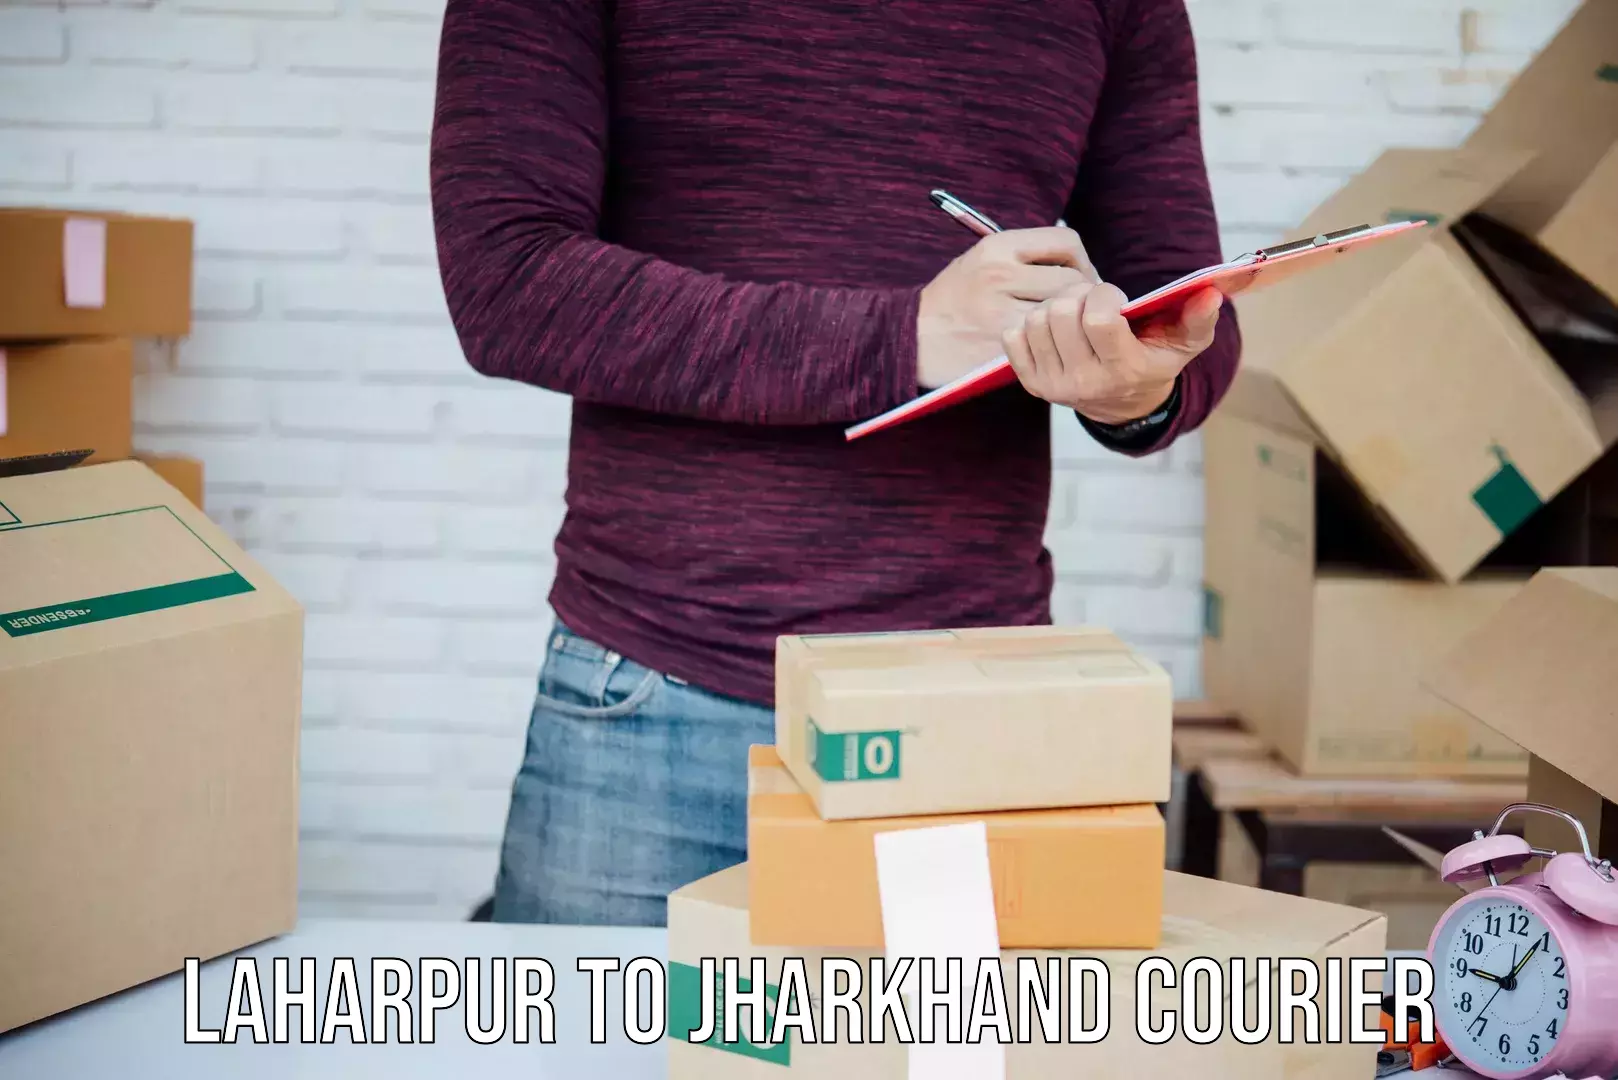 Doorstep delivery service Laharpur to Jharkhand